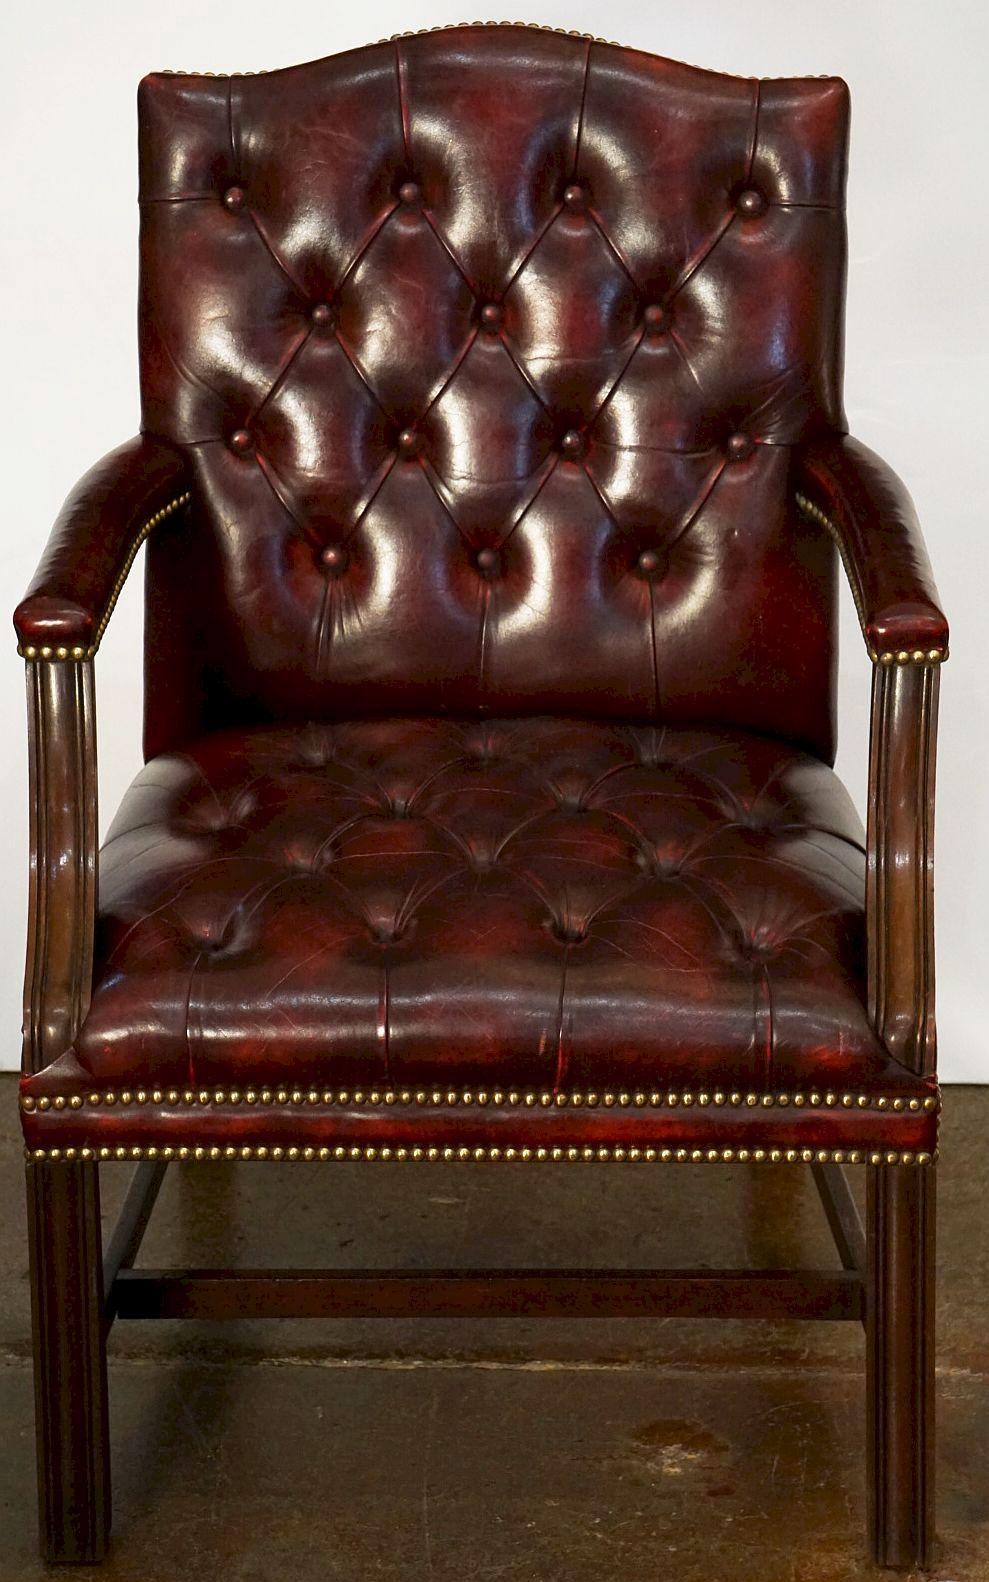 Chippendale Large English Armchair or Library Chair of Tufted Leather